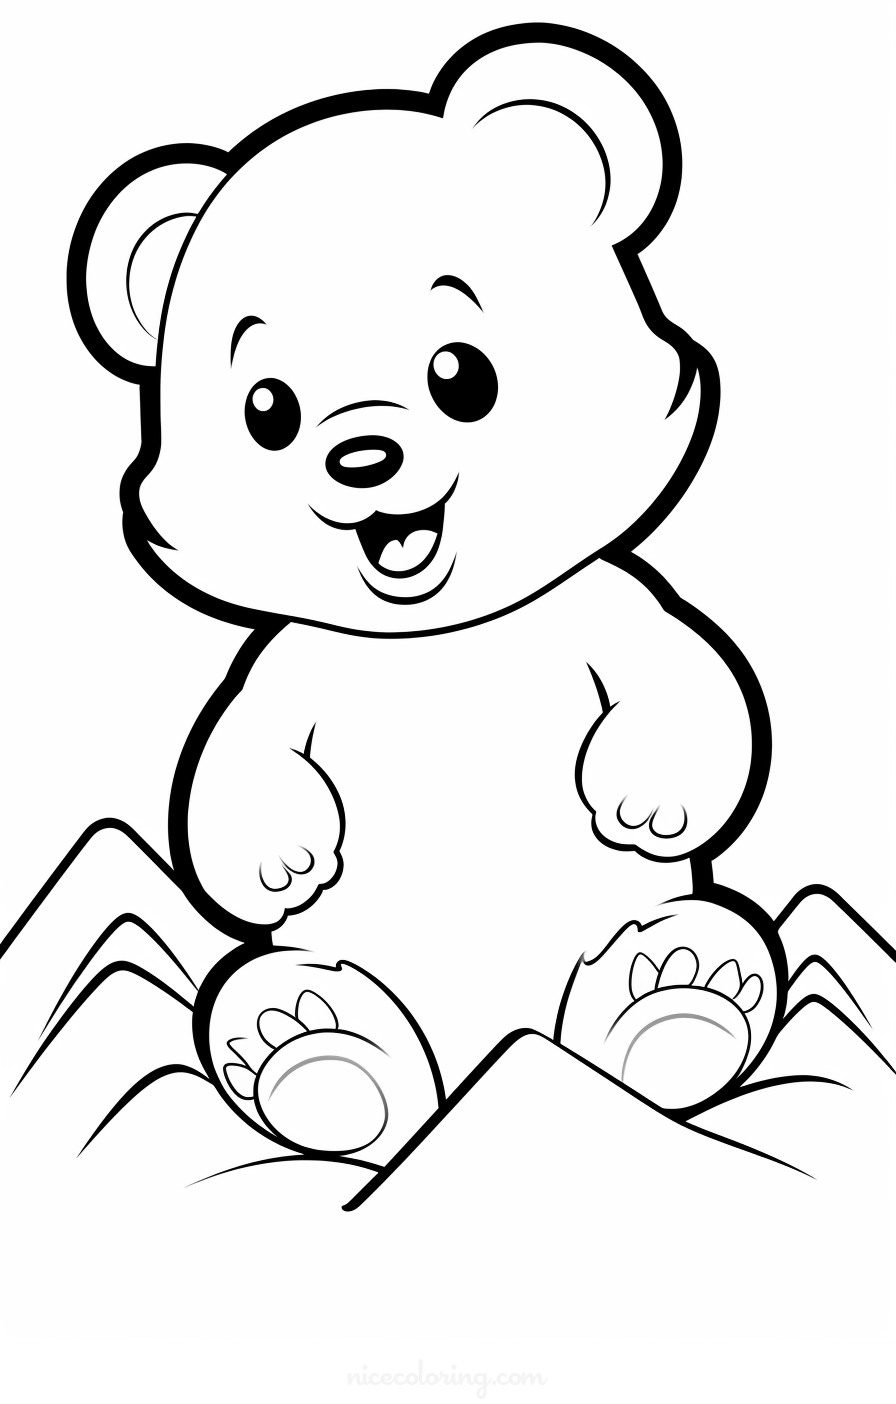 bear family enjoying a picnic in the forest coloring page